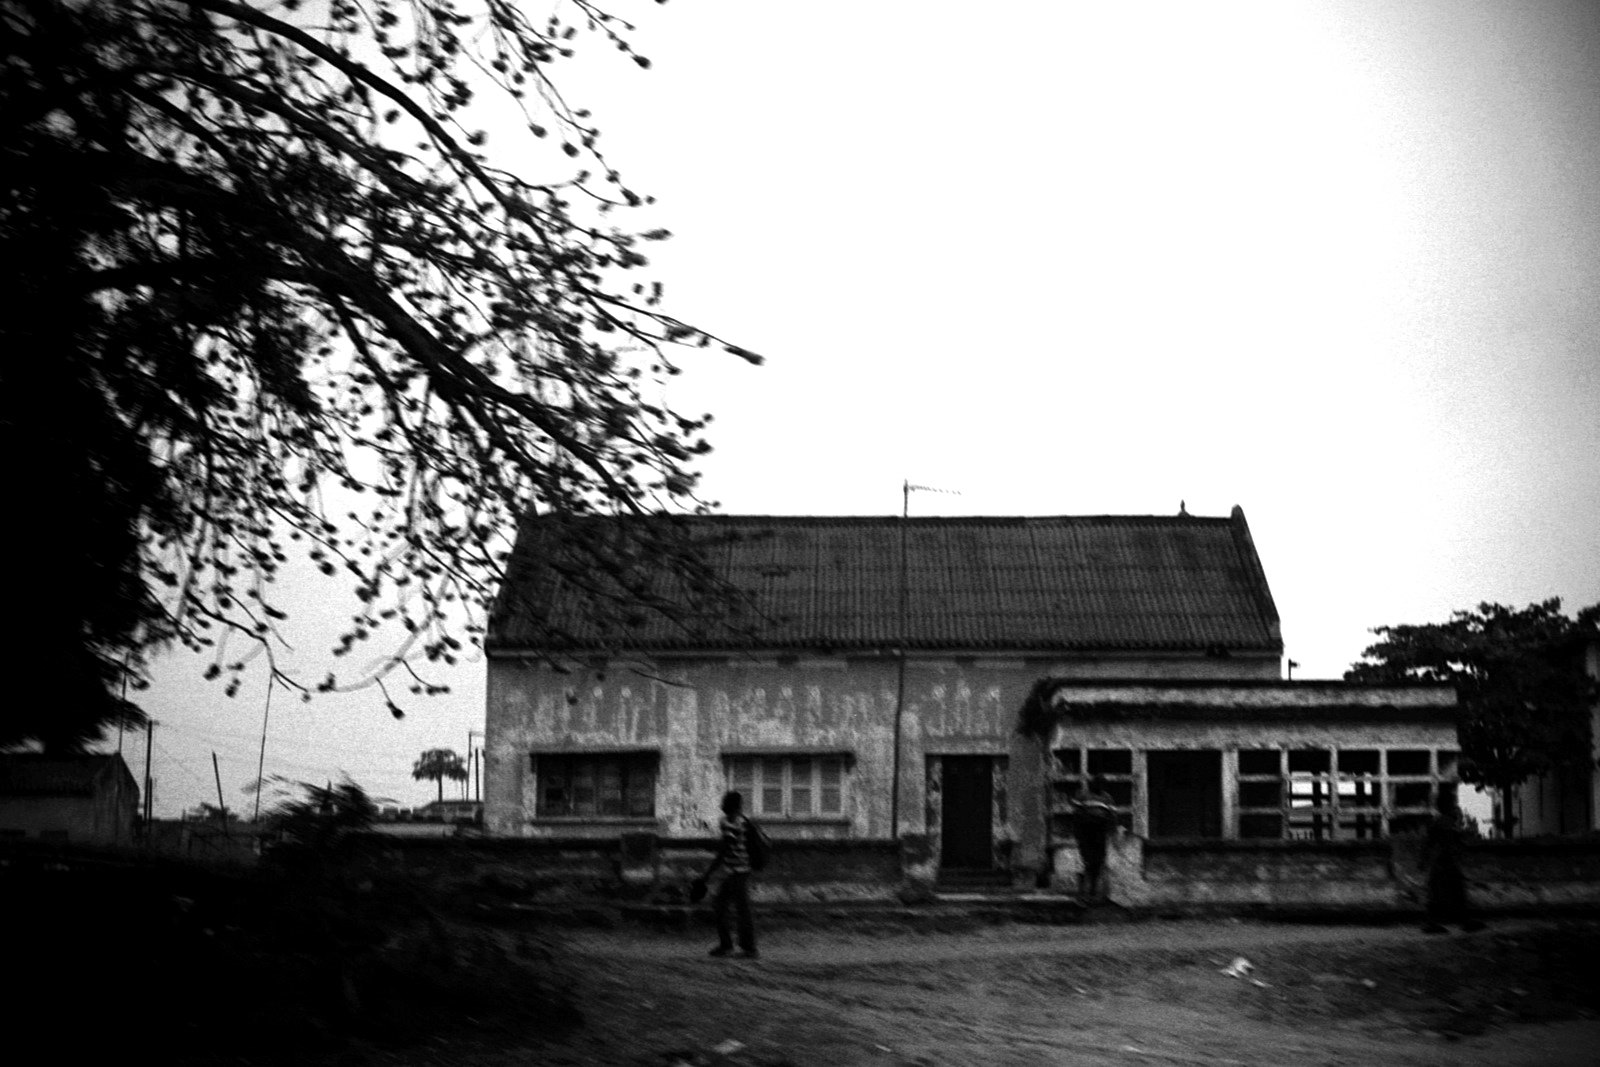 black and white po of a house with two people walking out front